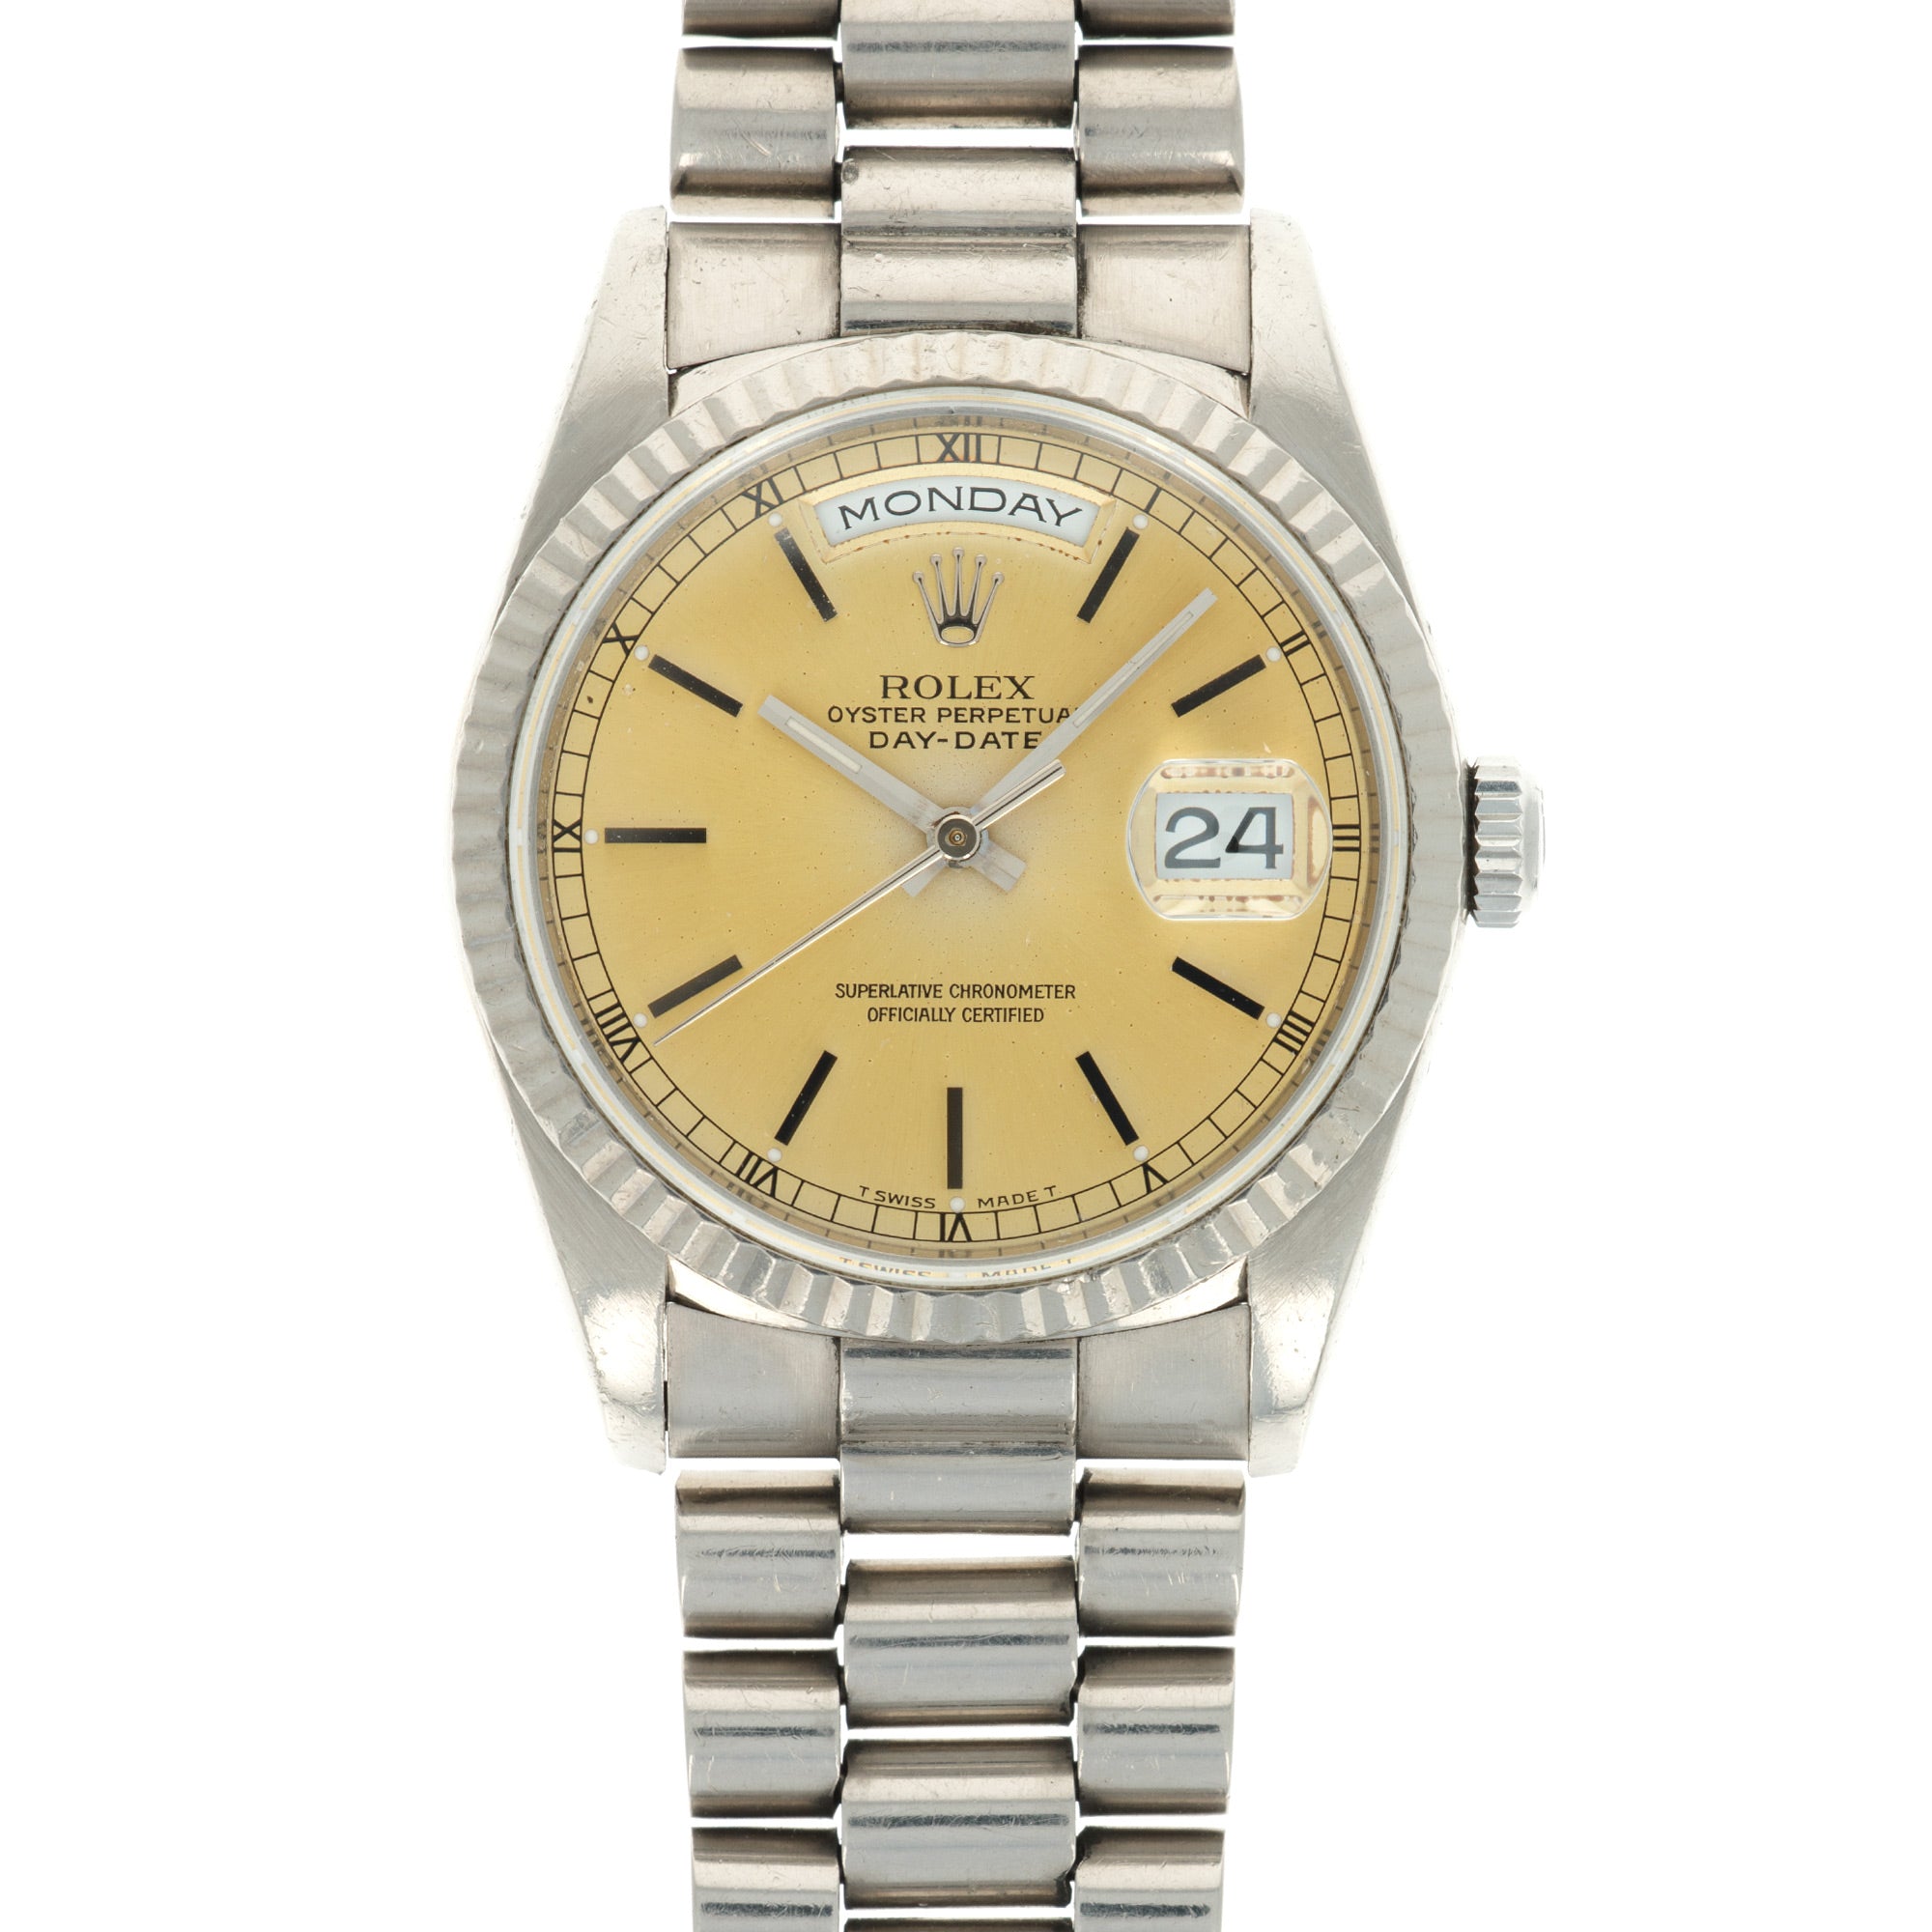 Rolex - Rolex White Gold Day-Date 18239 - The Keystone Watches